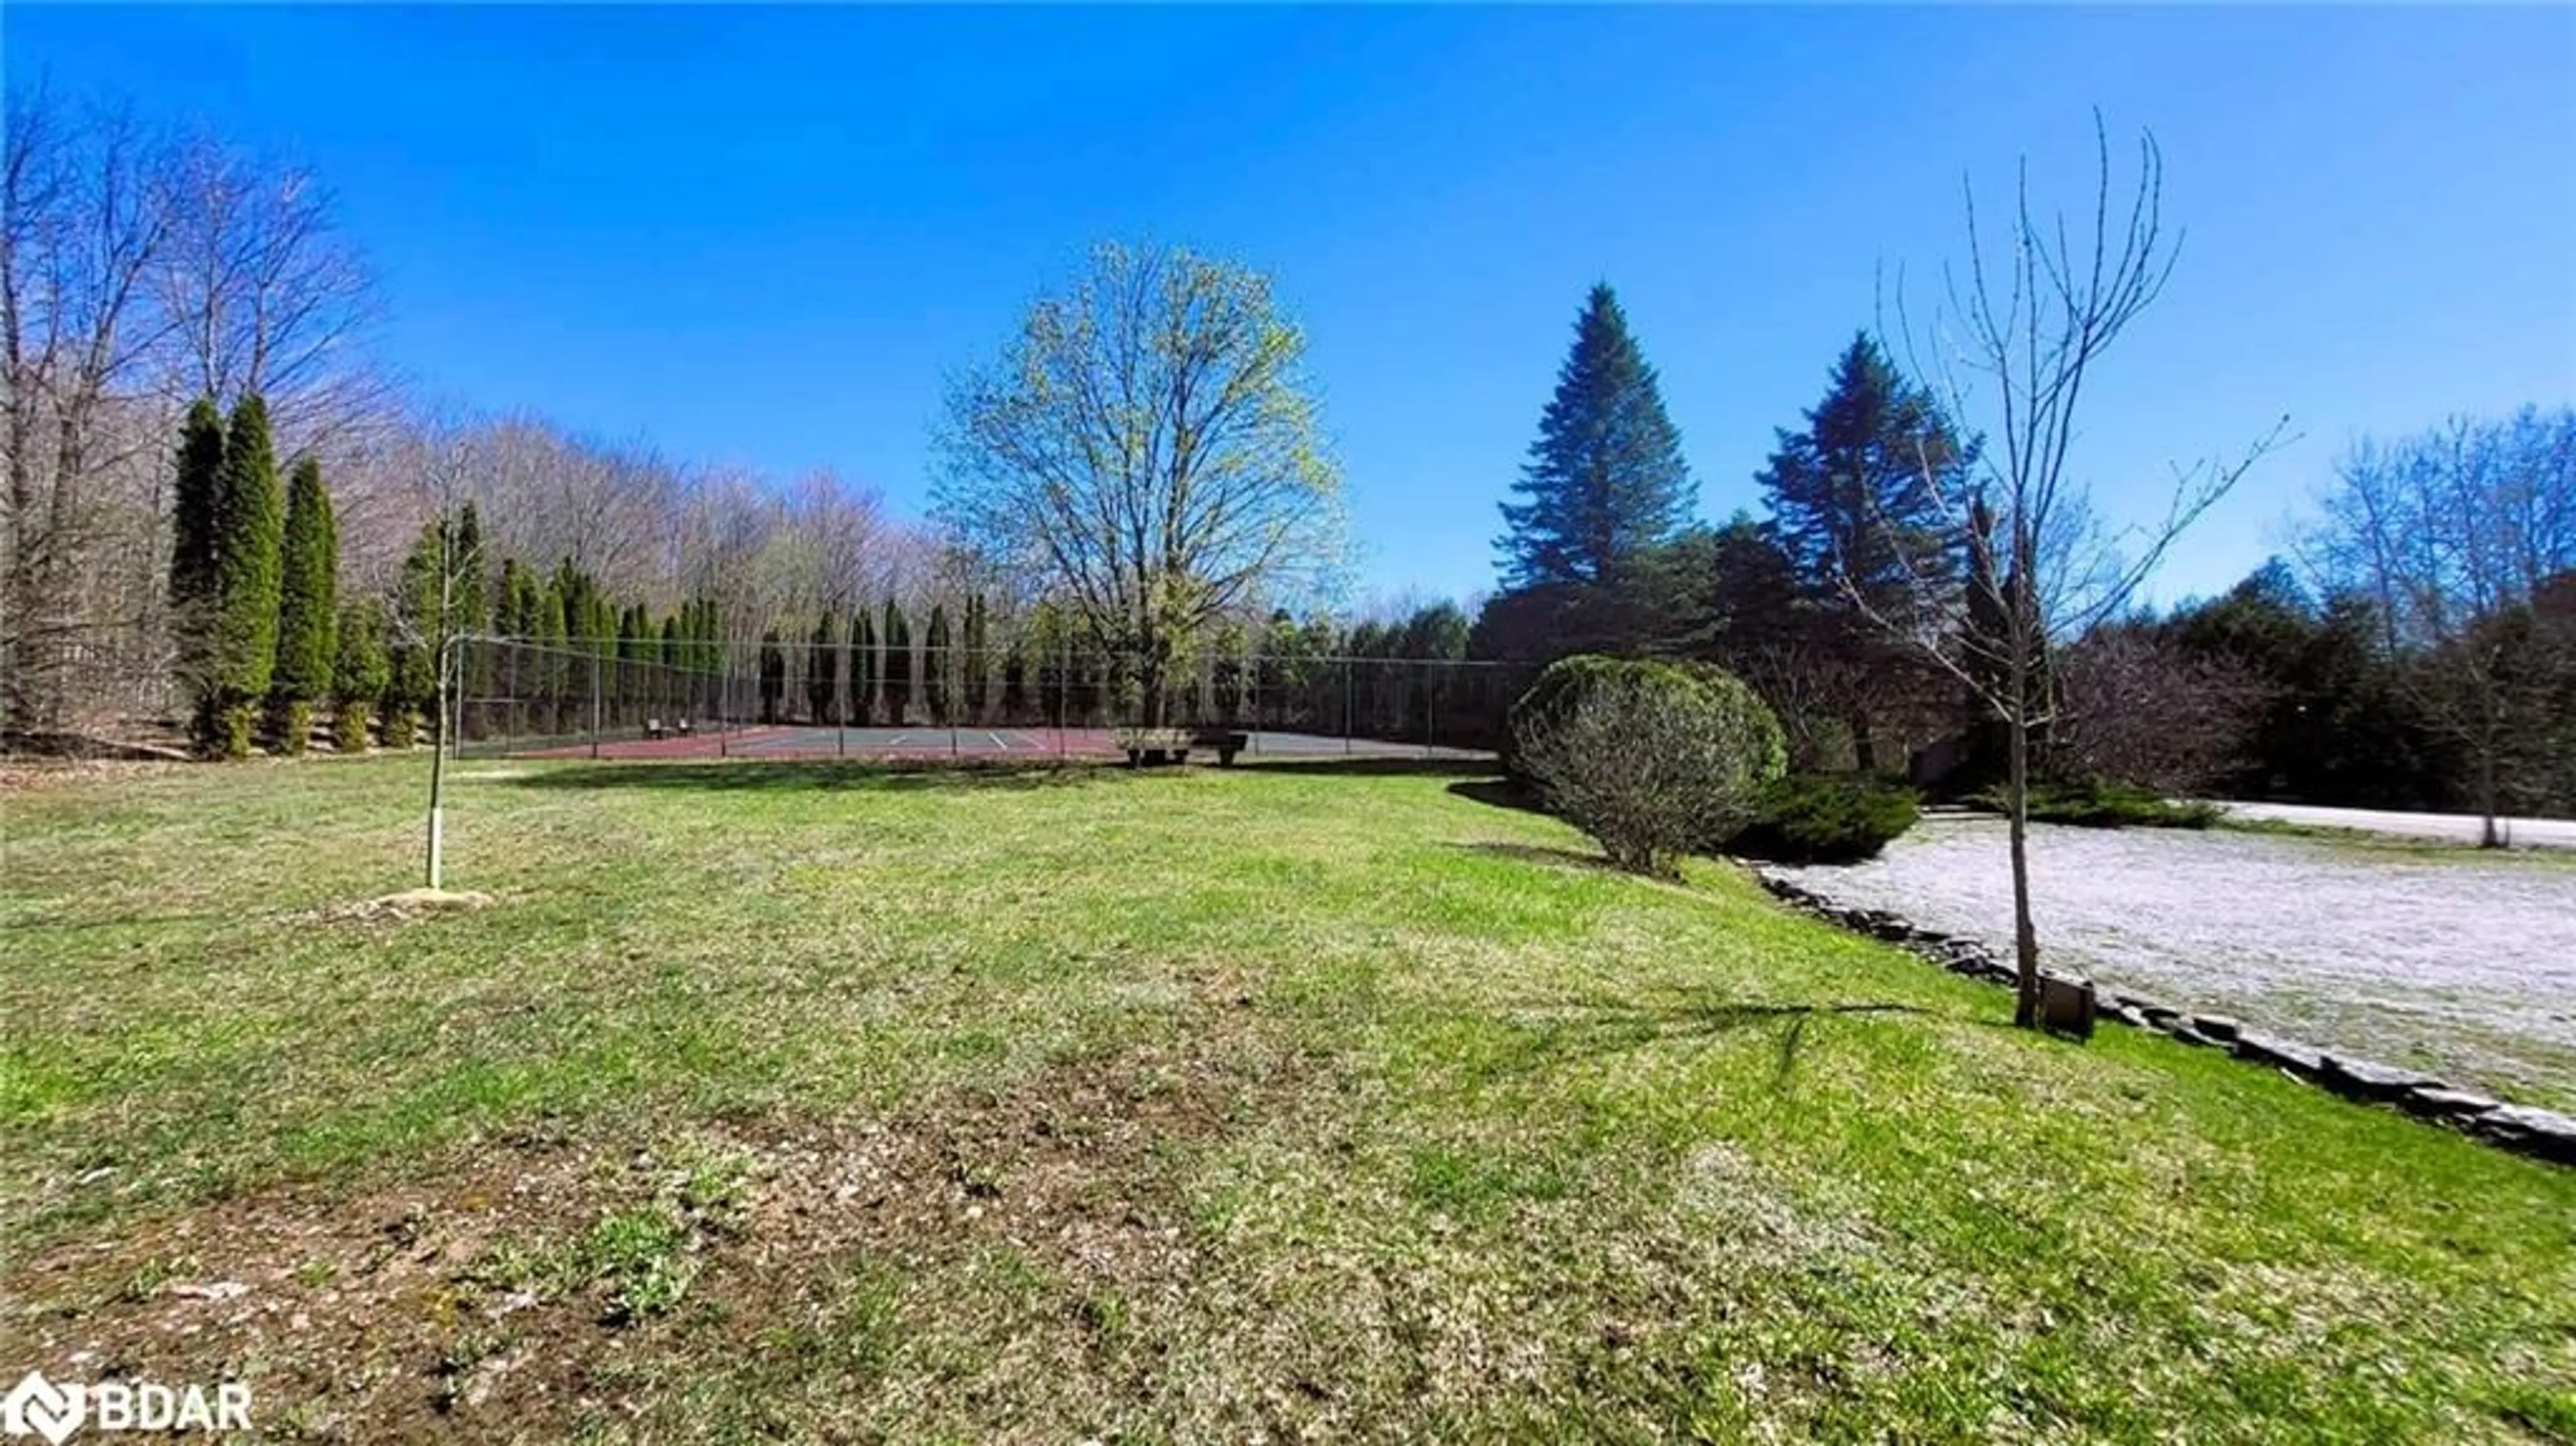 Fenced yard for 3 Forest Wood Lane, Oro-Medonte Ontario L0L 1T0